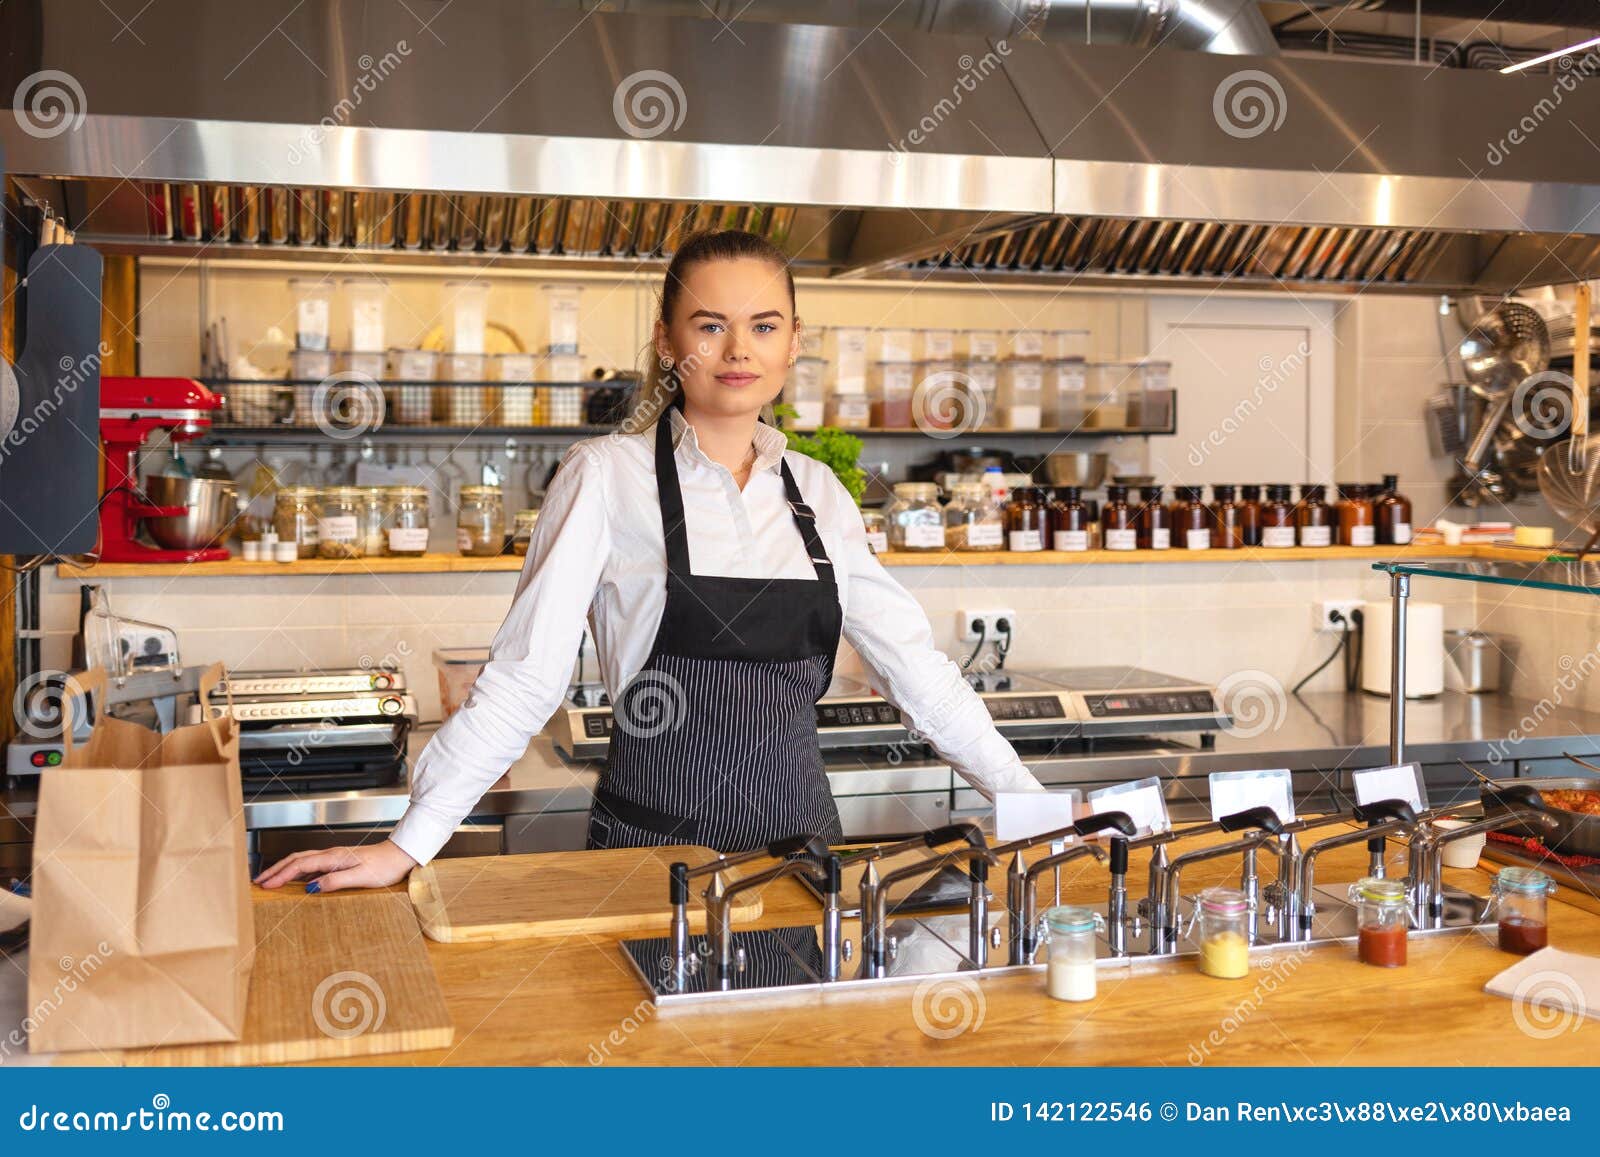 portrait of young woman standing behind kitchen counter in small eatery